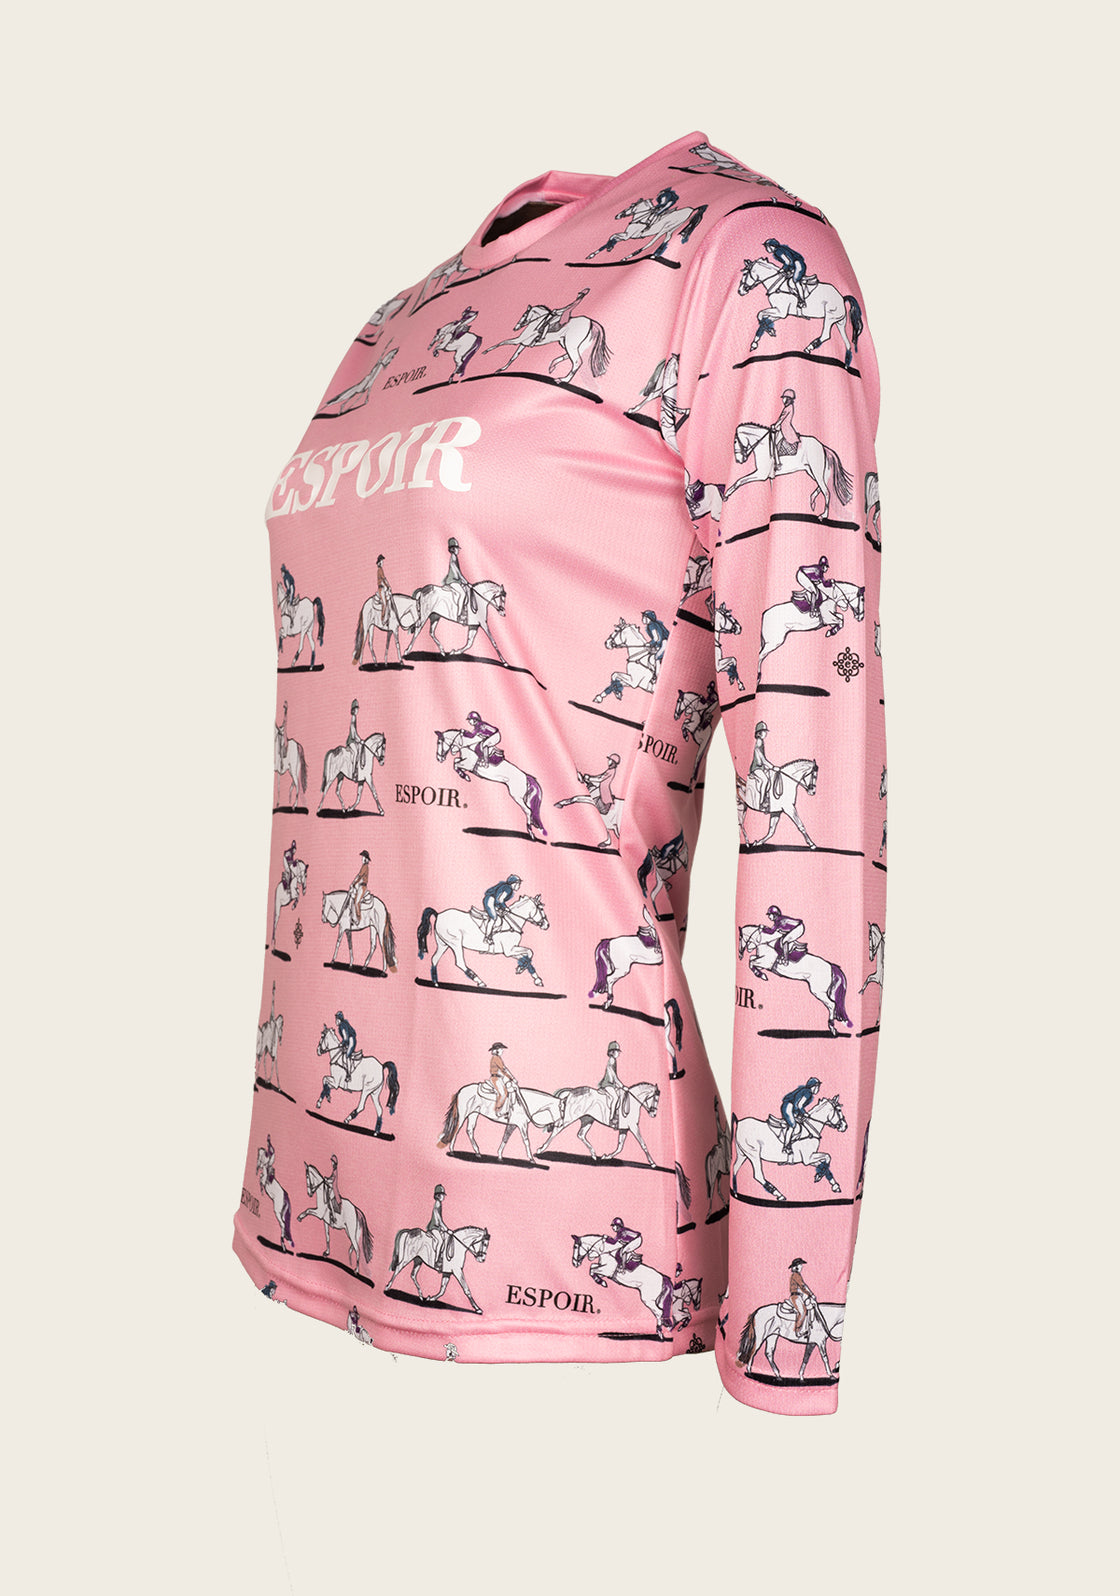 SALE United Equestrian on Pink T-Shirt